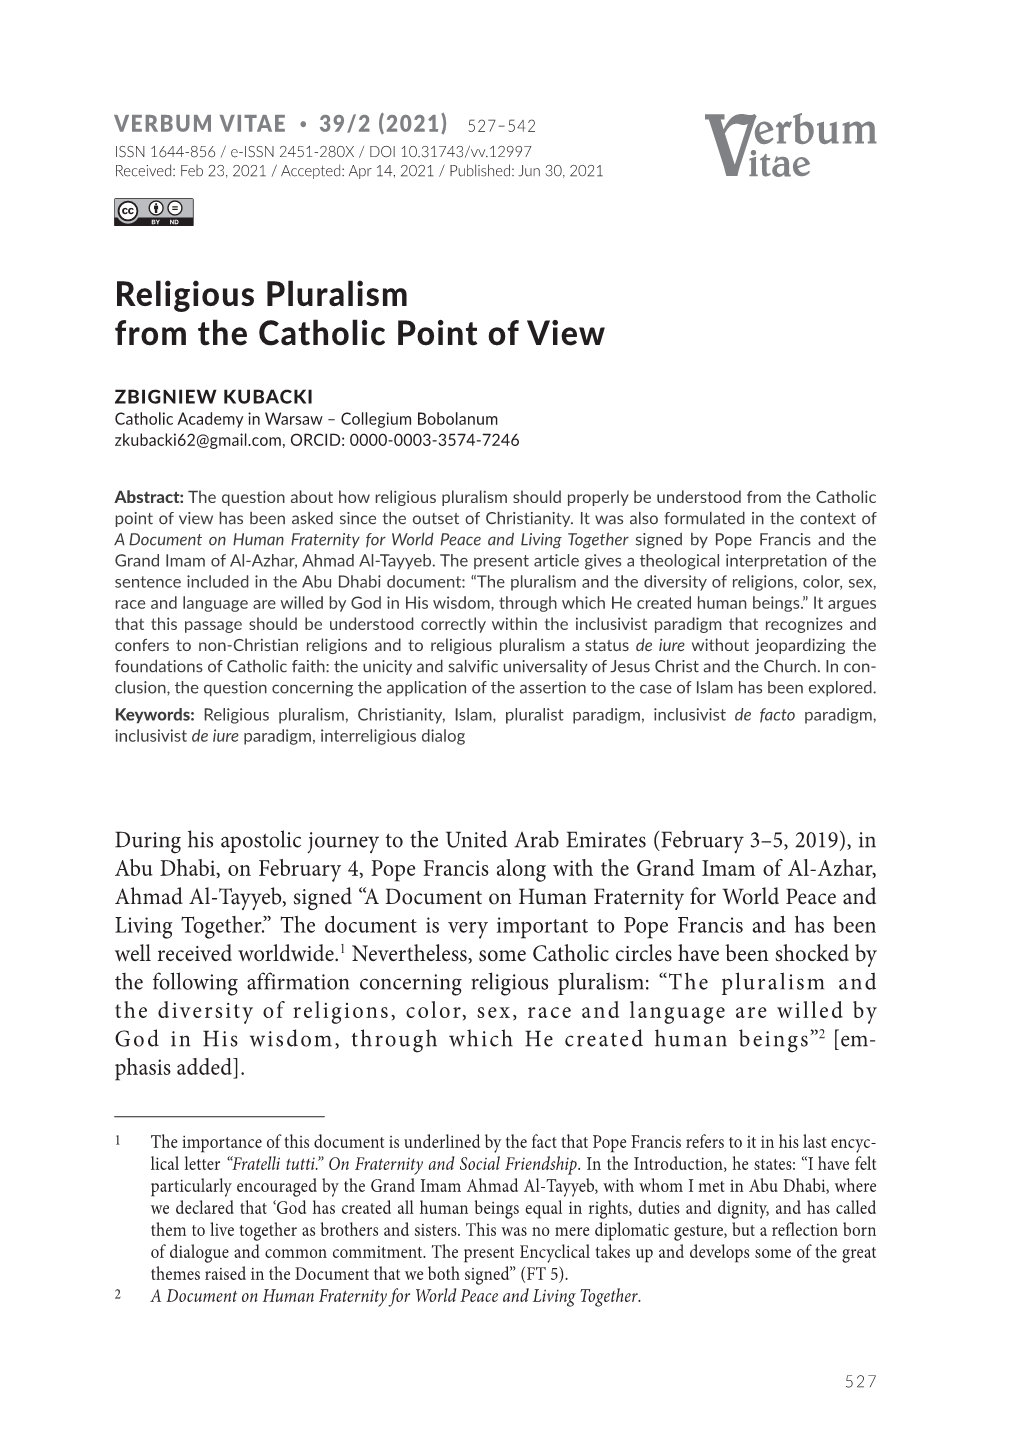 Religious Pluralism from the Catholic Point of View